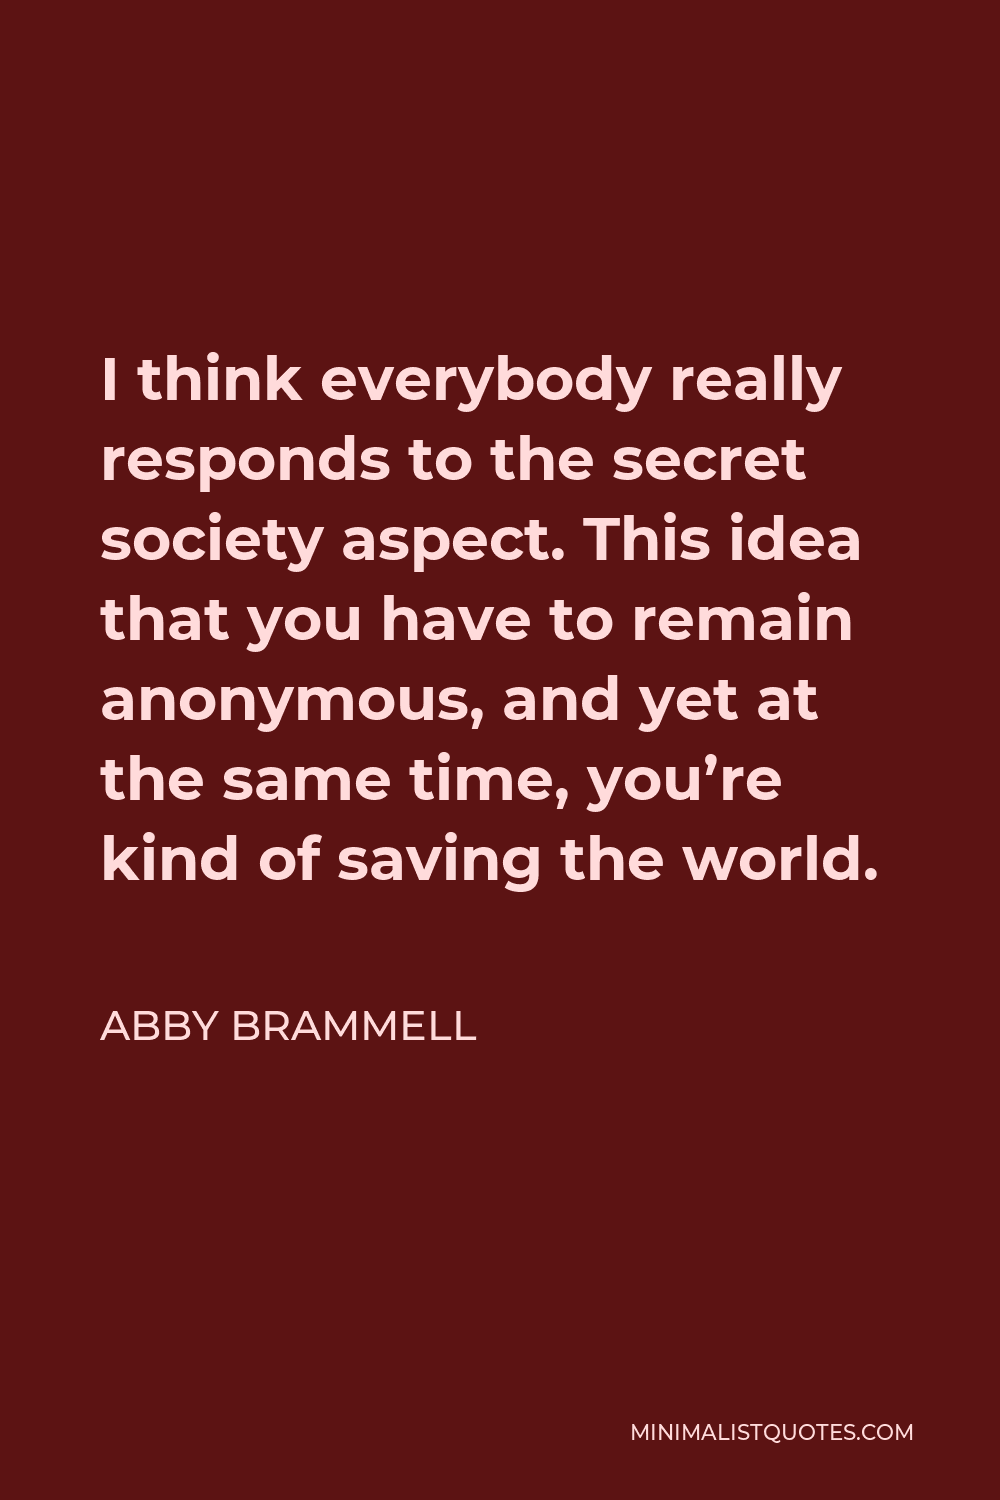 Abby Brammell Quote - I think everybody really responds to the secret society aspect. This idea that you have to remain anonymous, and yet at the same time, you’re kind of saving the world.